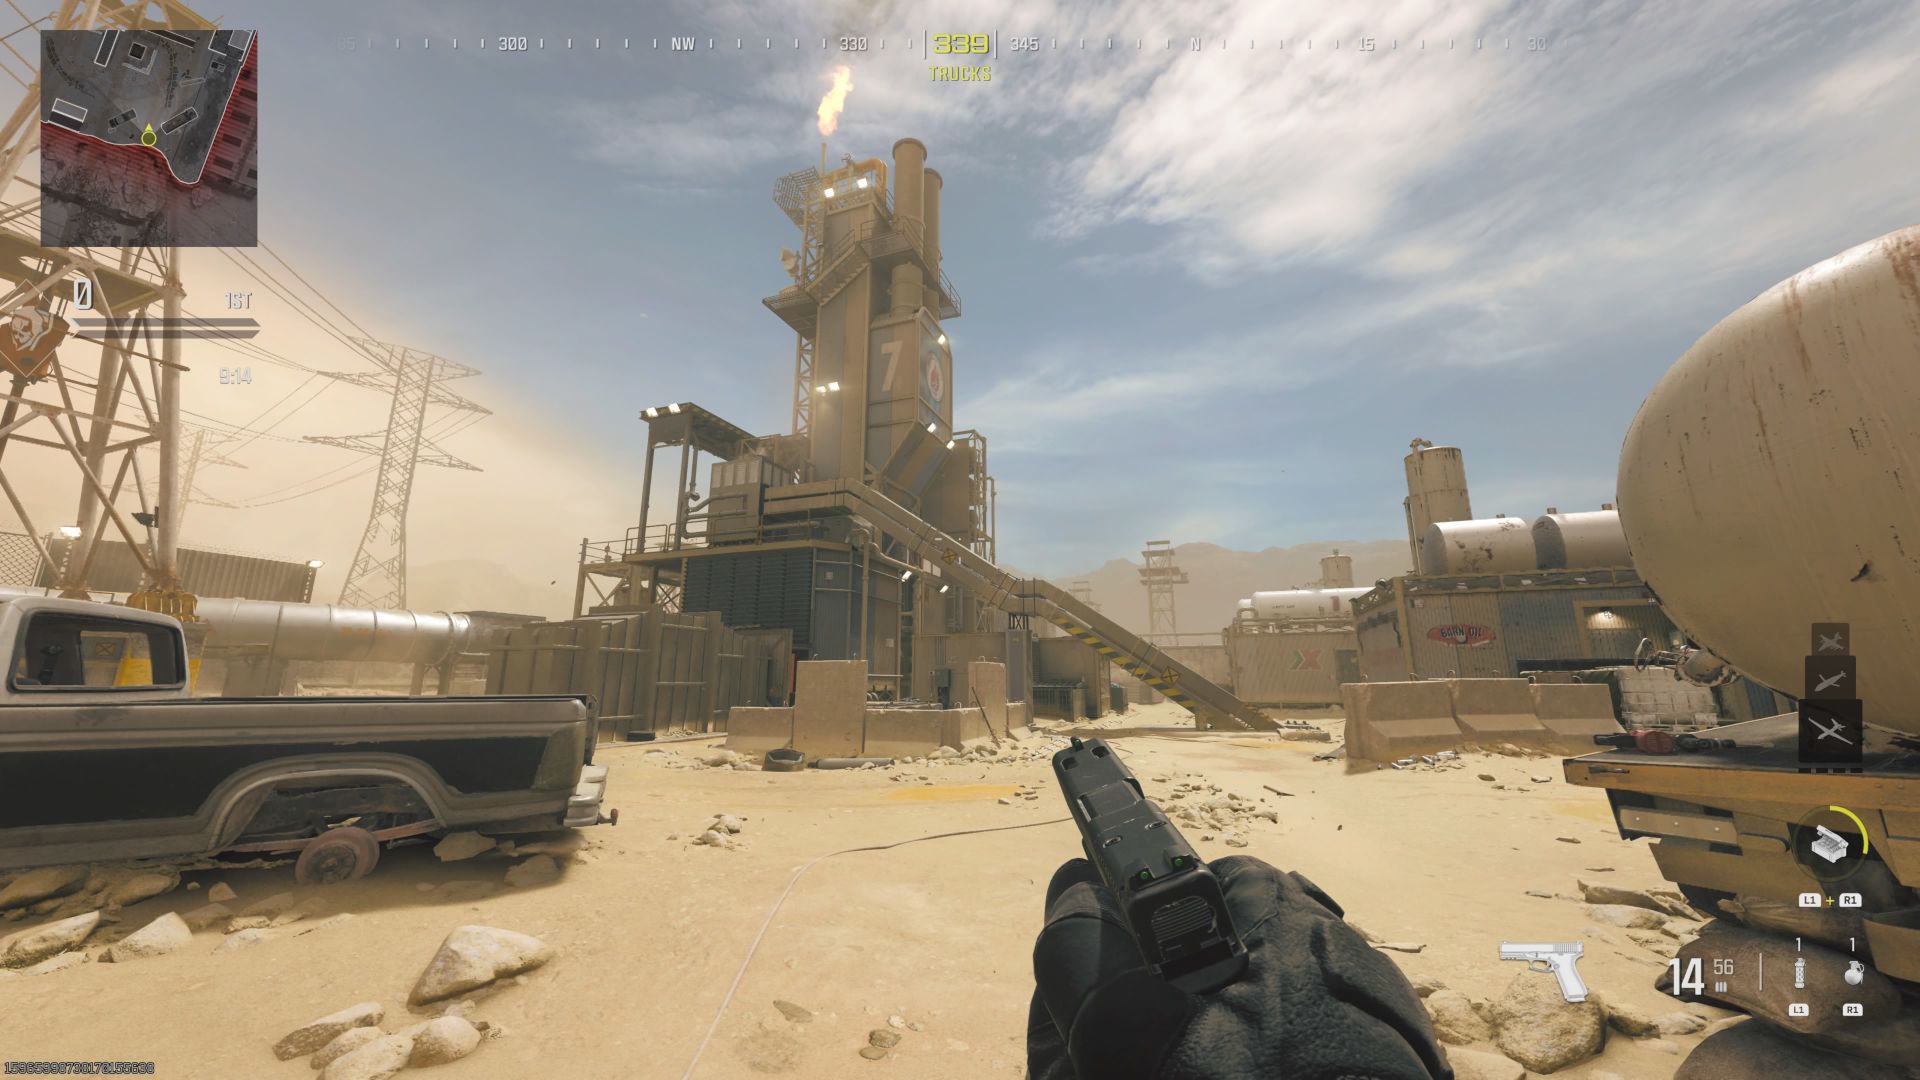 Screenshot from MW3 multiplayer map Rust shows the small desert arena with a large oil extractor in the middle with fire erupting from the top.